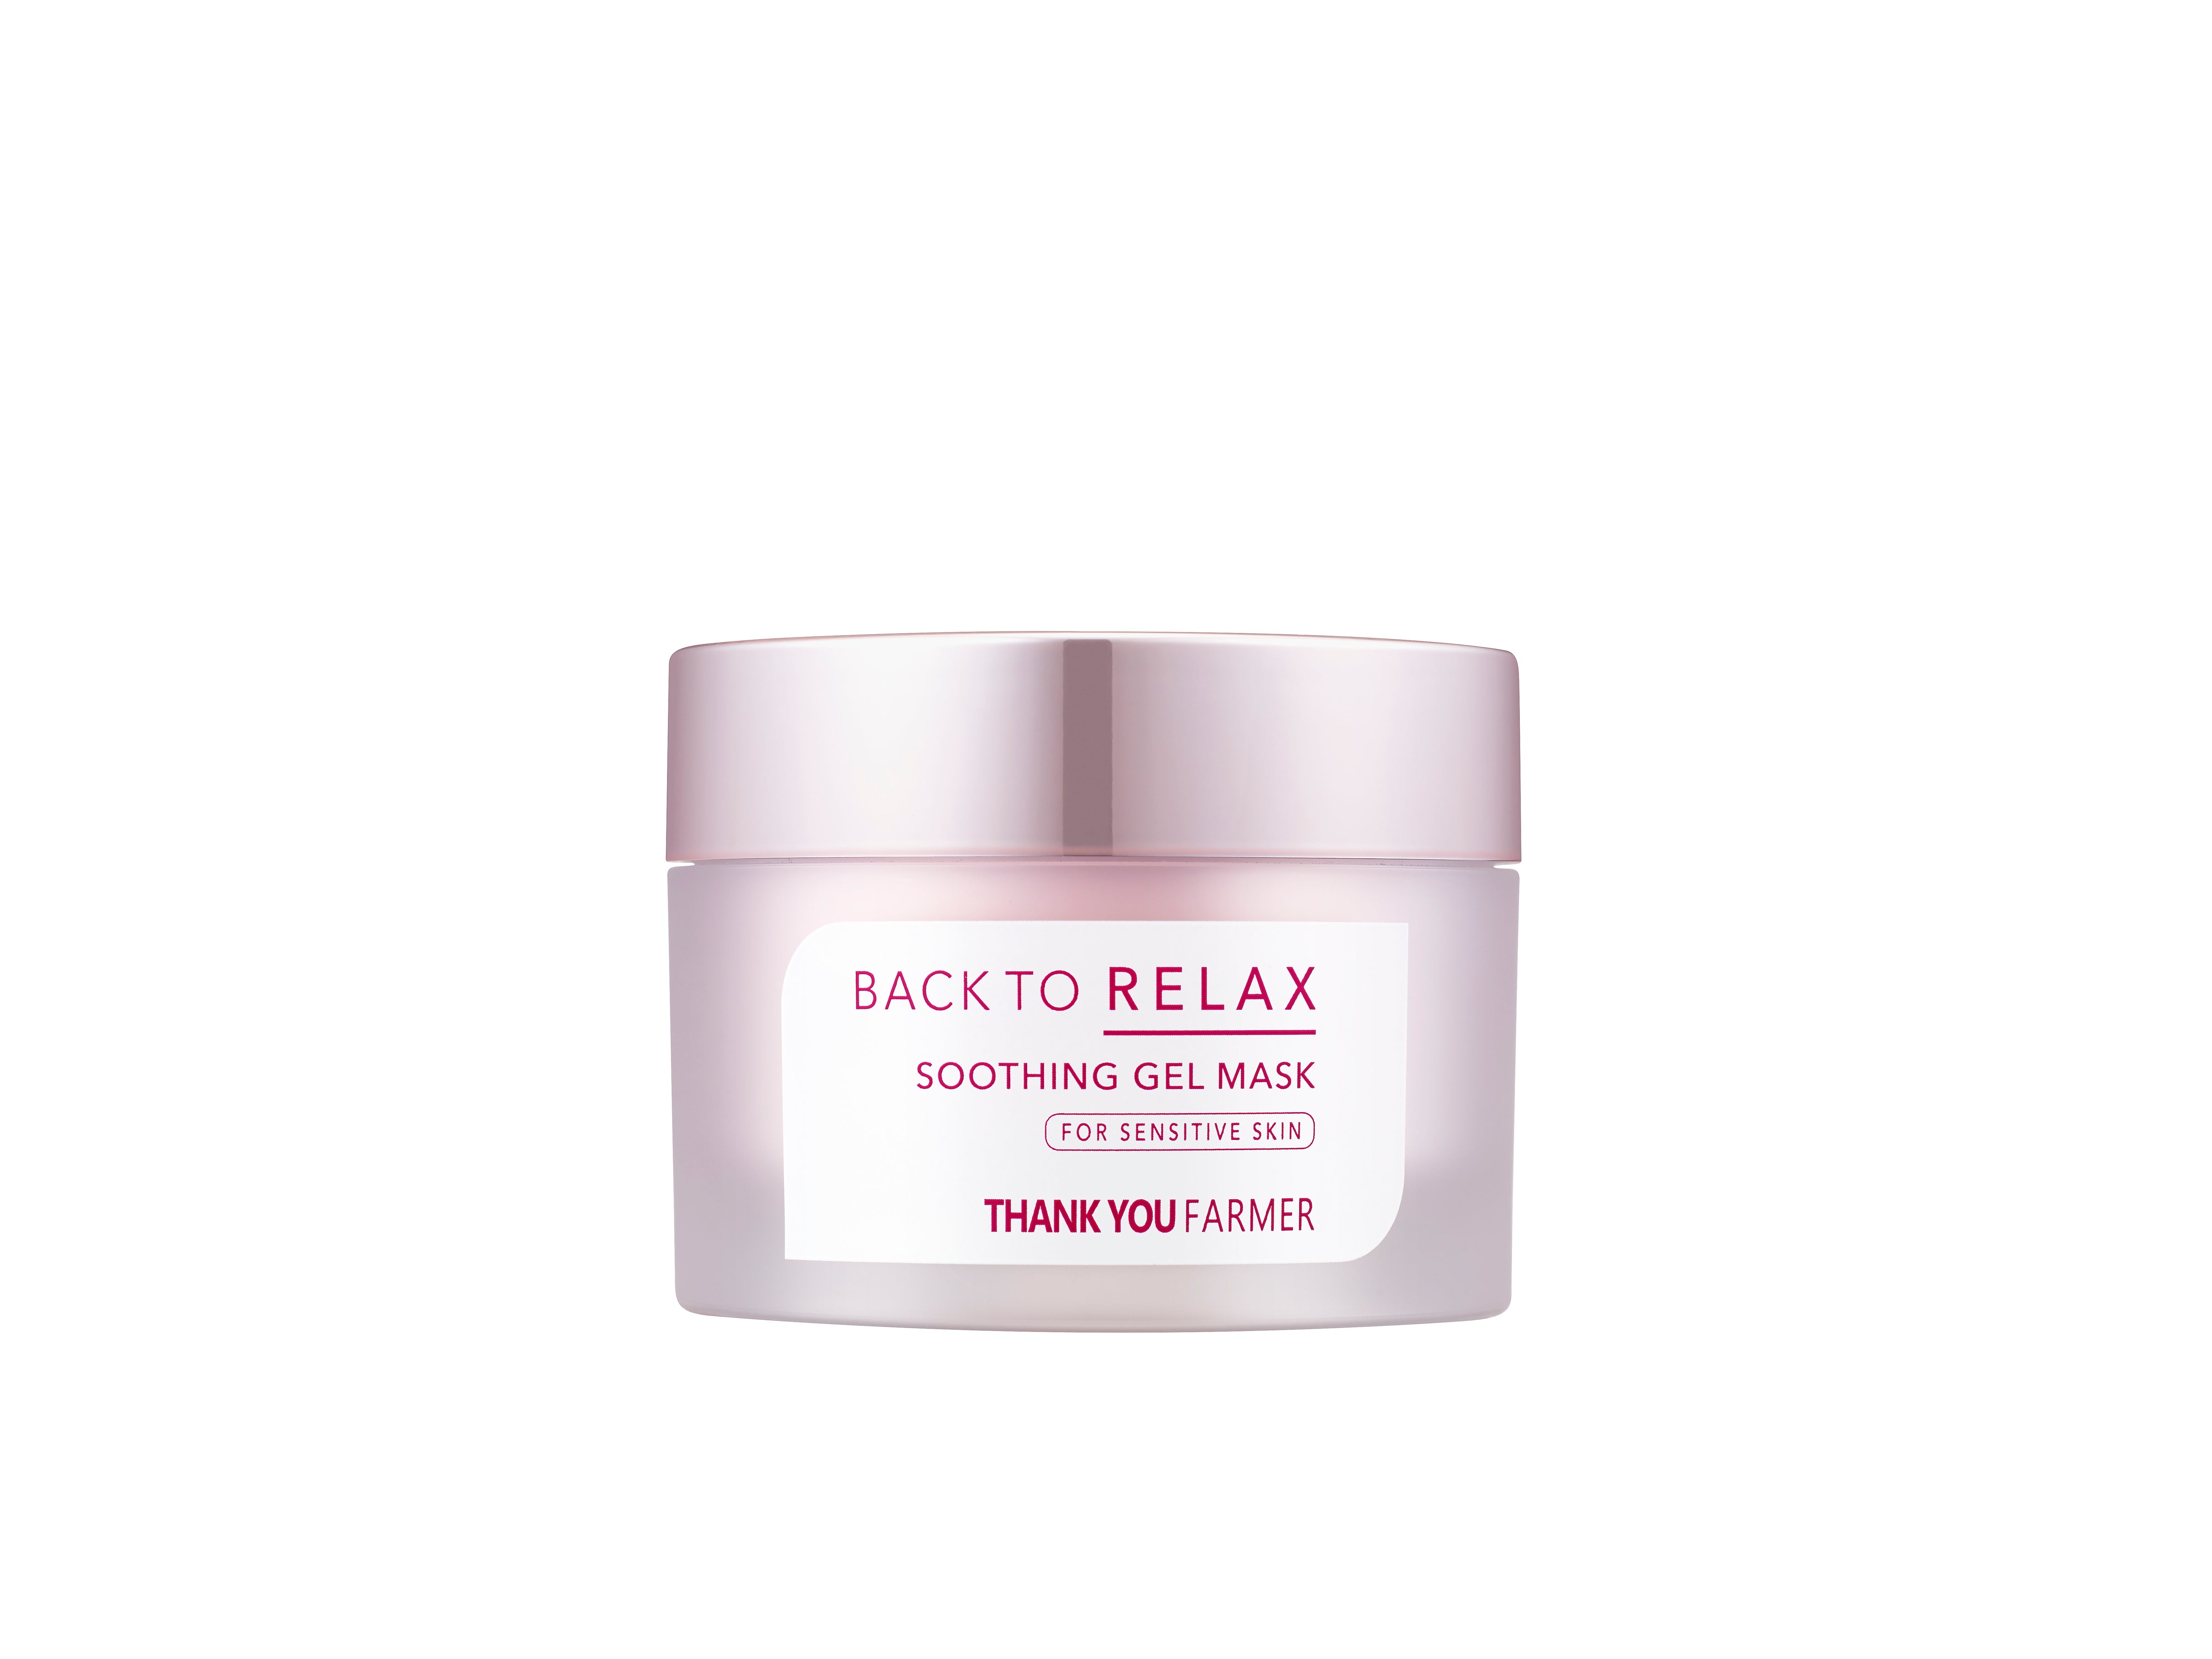 Back to Relax Soothing Gel Mask